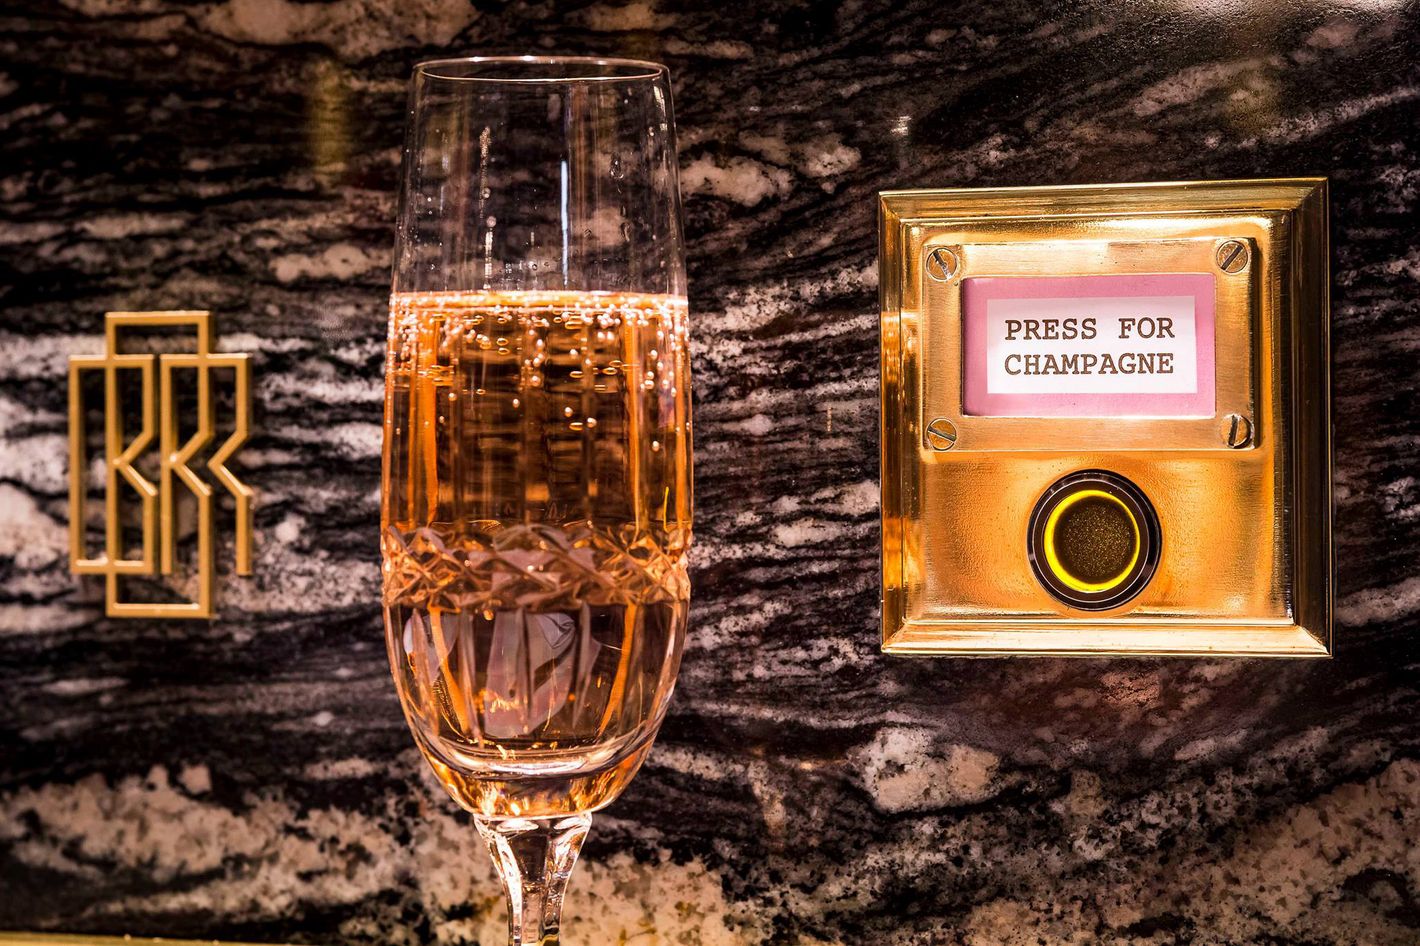 The choice architecture of a Press for Champagne button 🍾